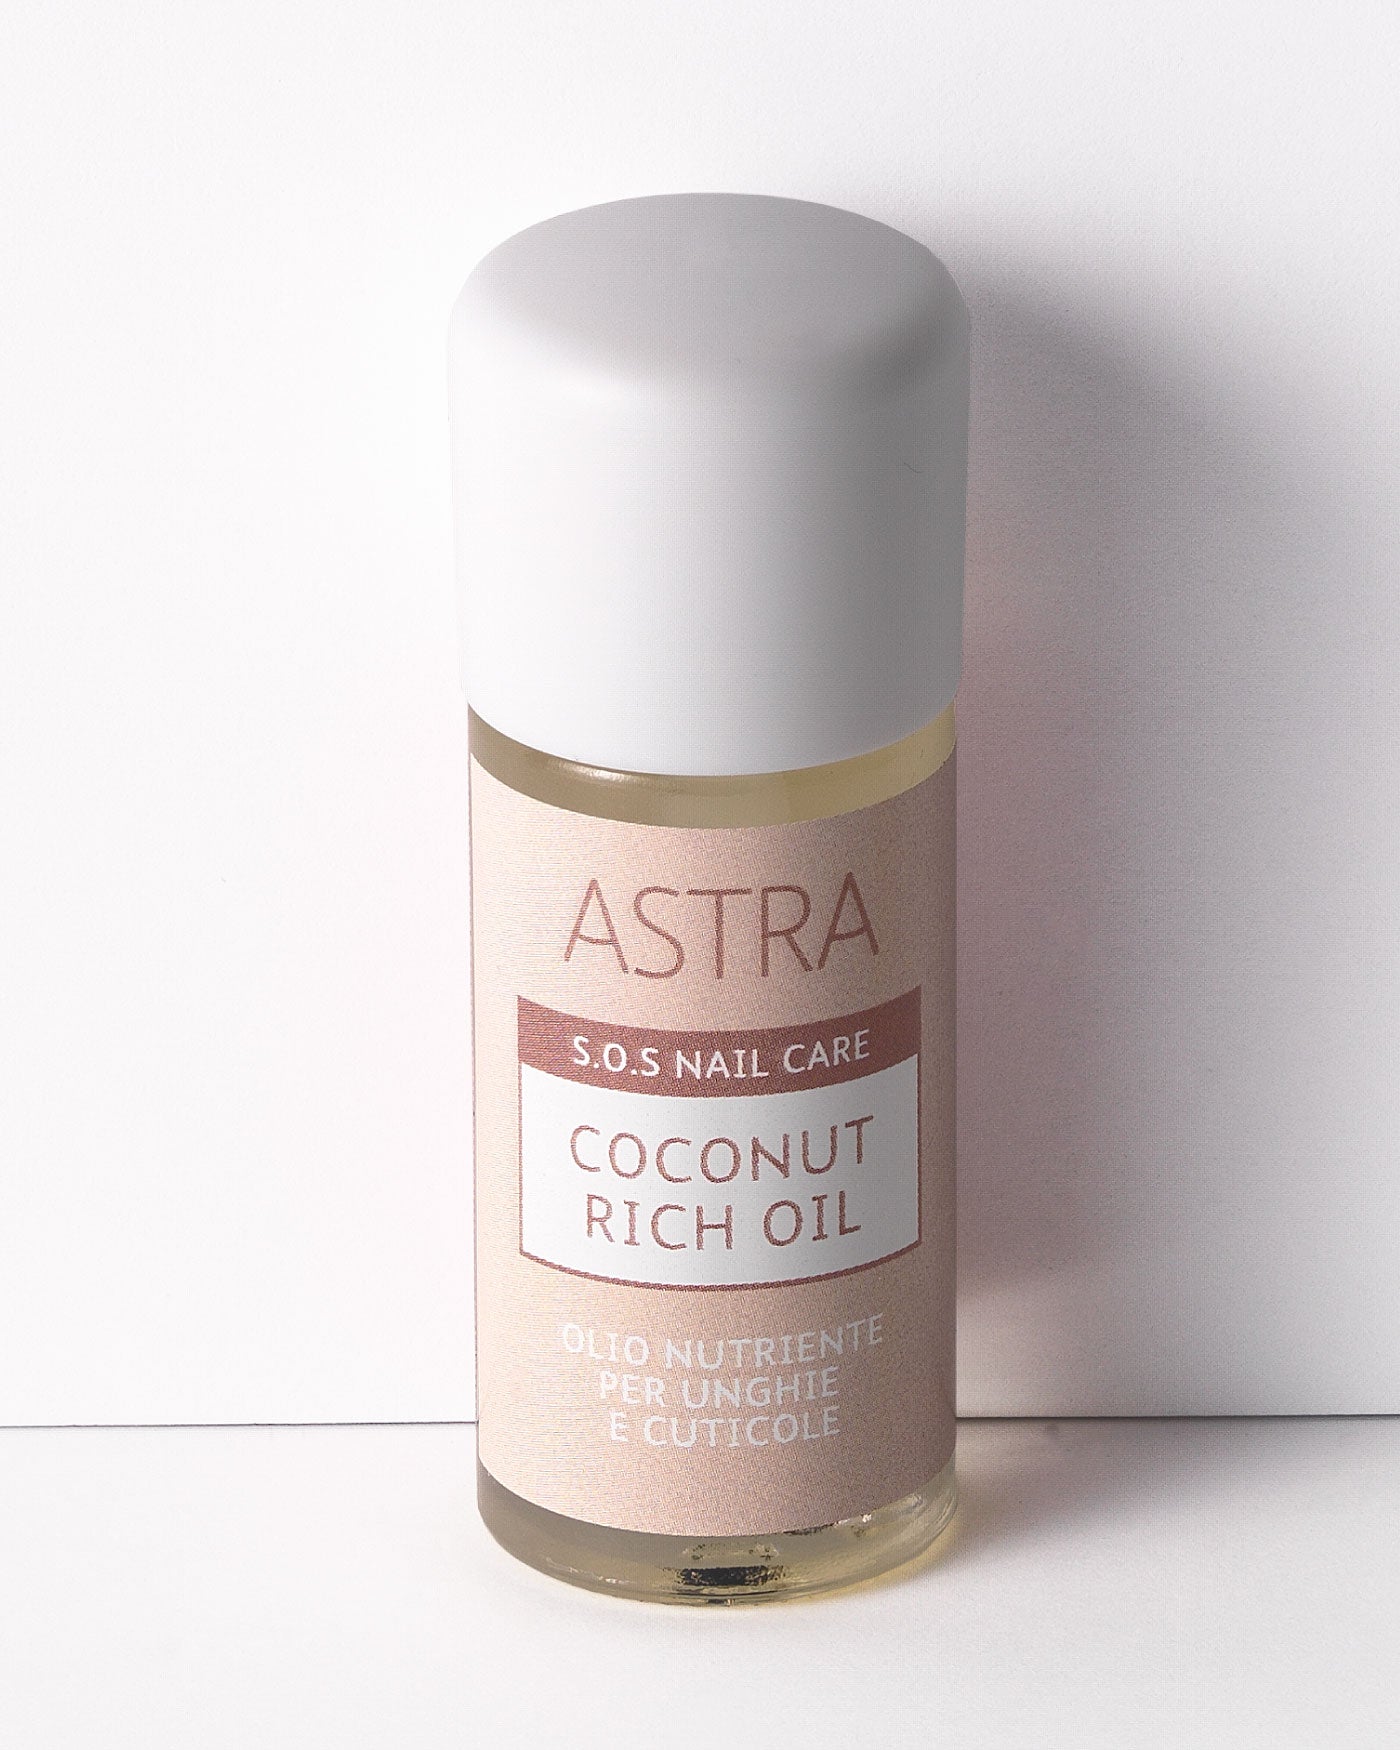 S.O.S NAIL CARE - COCONUT RICH OIL - Nails - Astra Make-Up